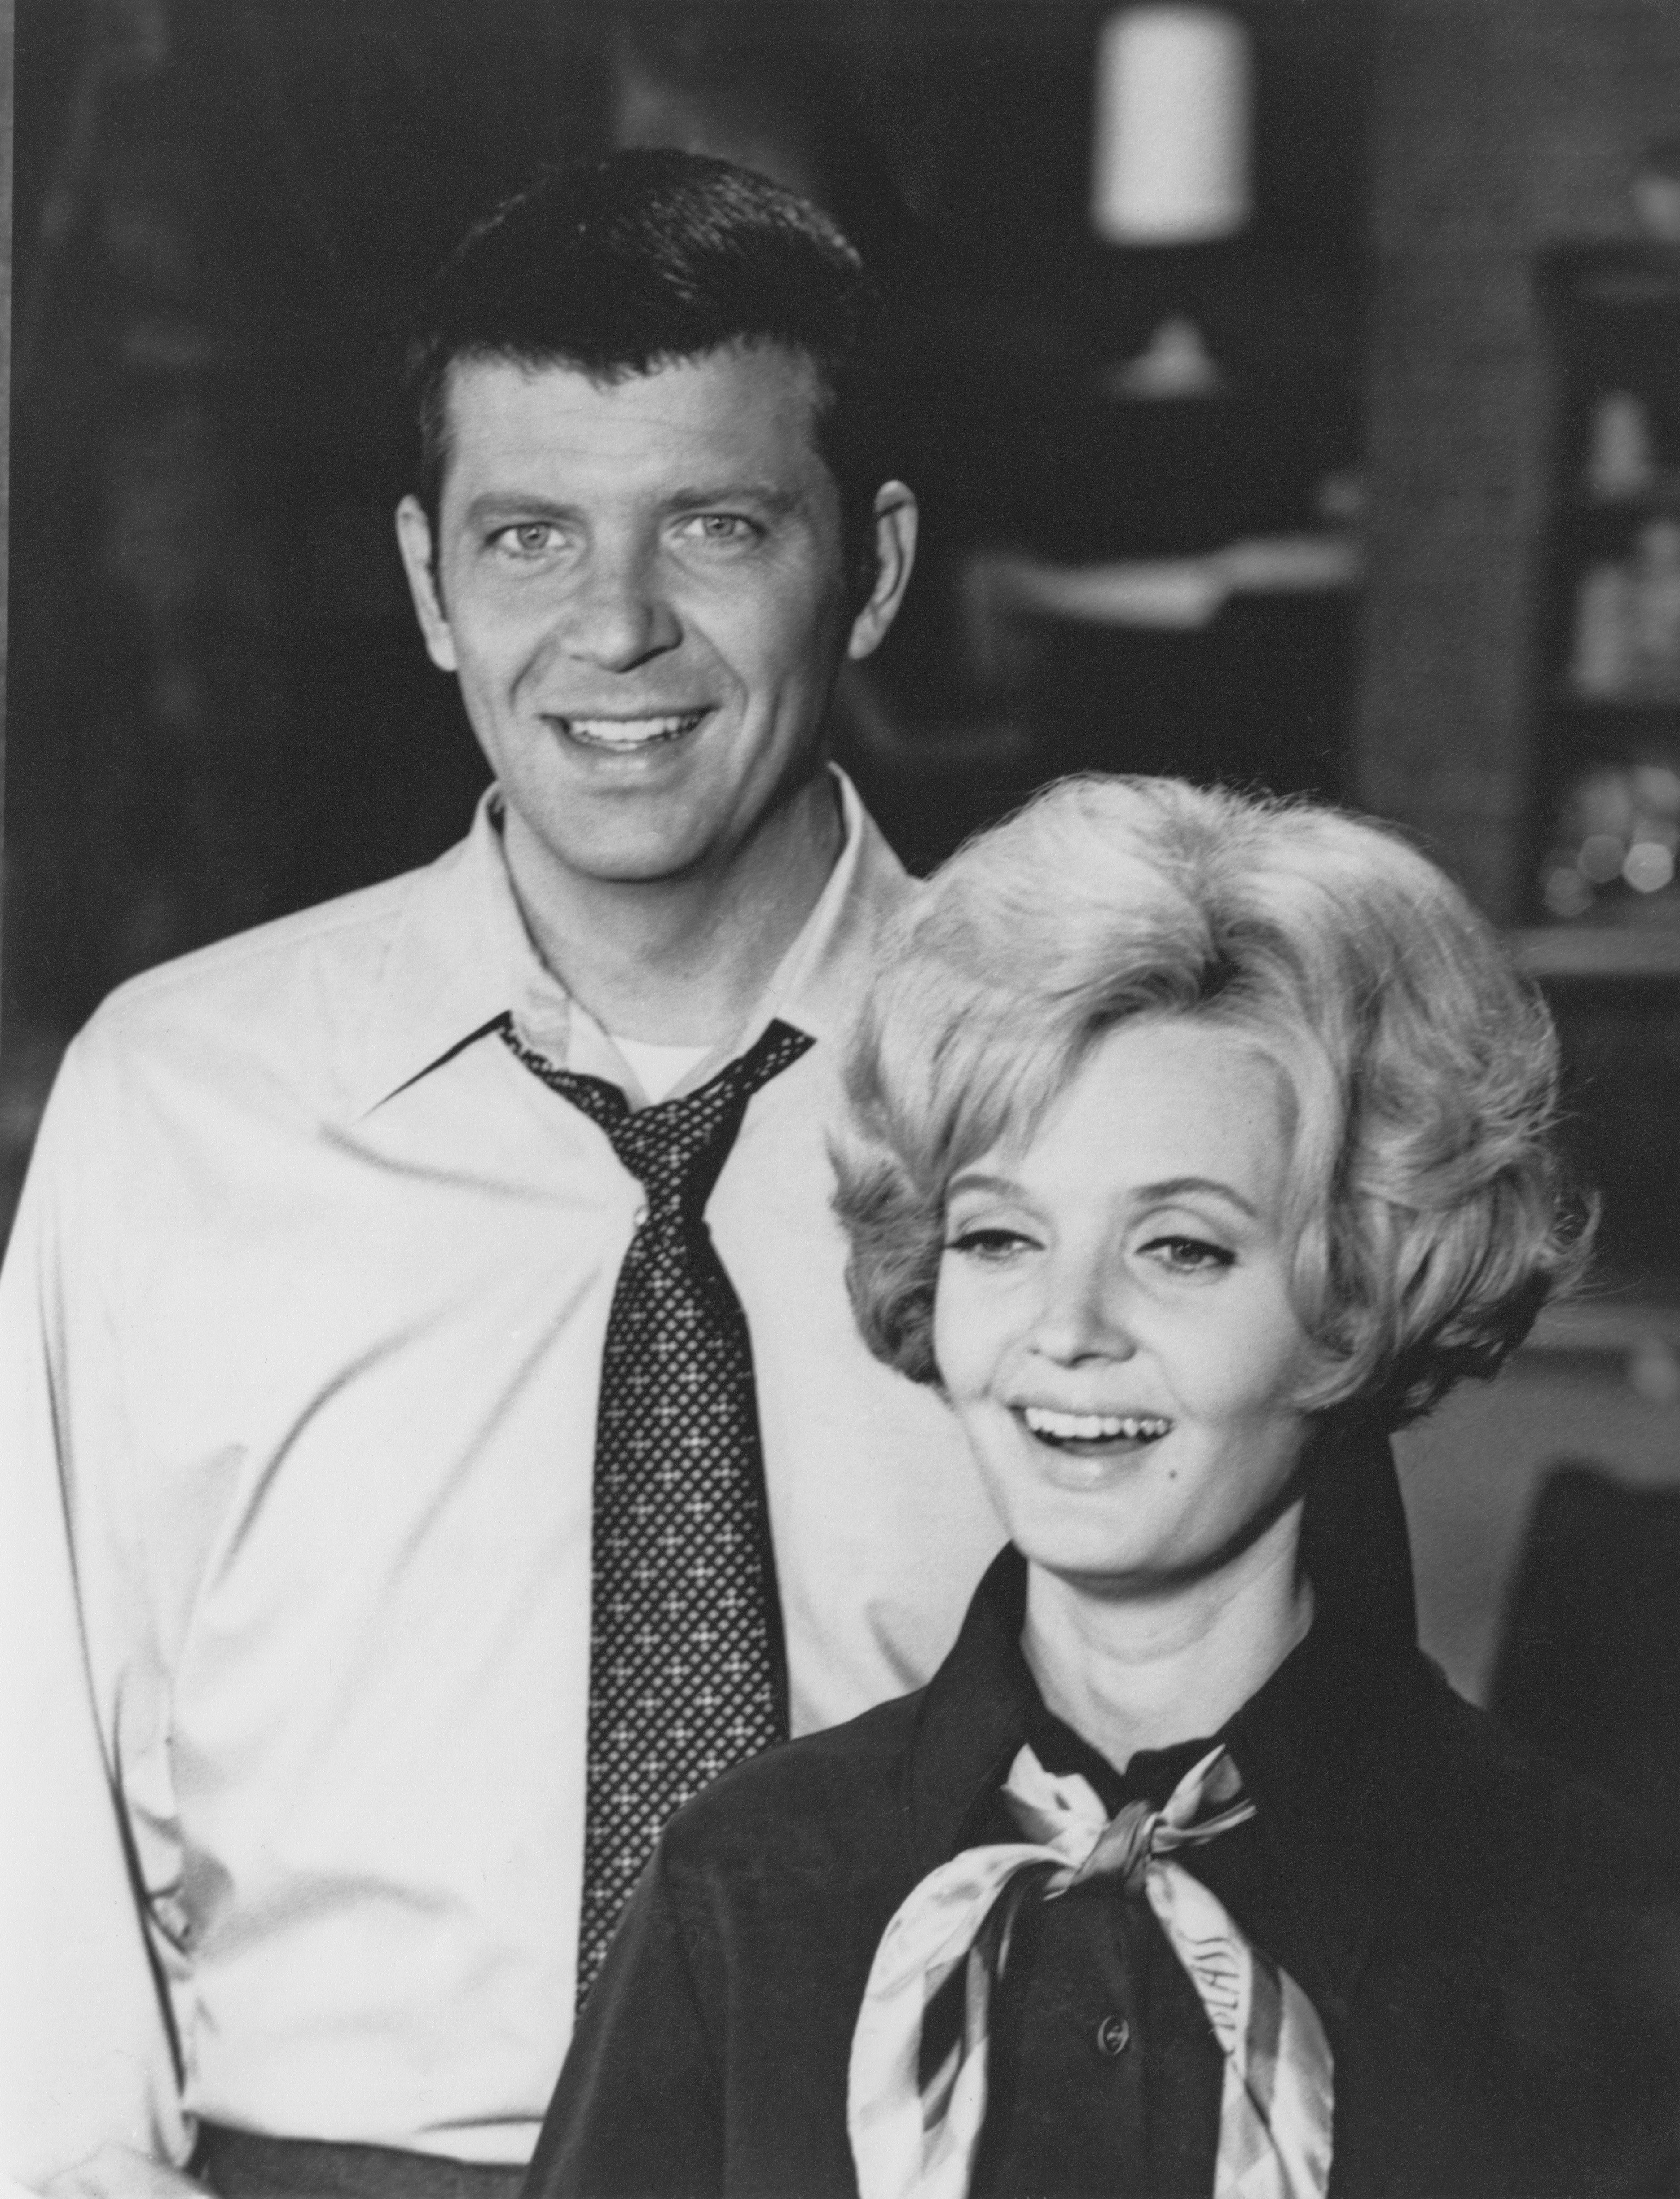 American actors Robert Reed, as Mike Brady, and Florence Henderson as Carol Brady, in the US TV sitcom 'The Brady Bunch', circa 1970 | Source: Getty Images